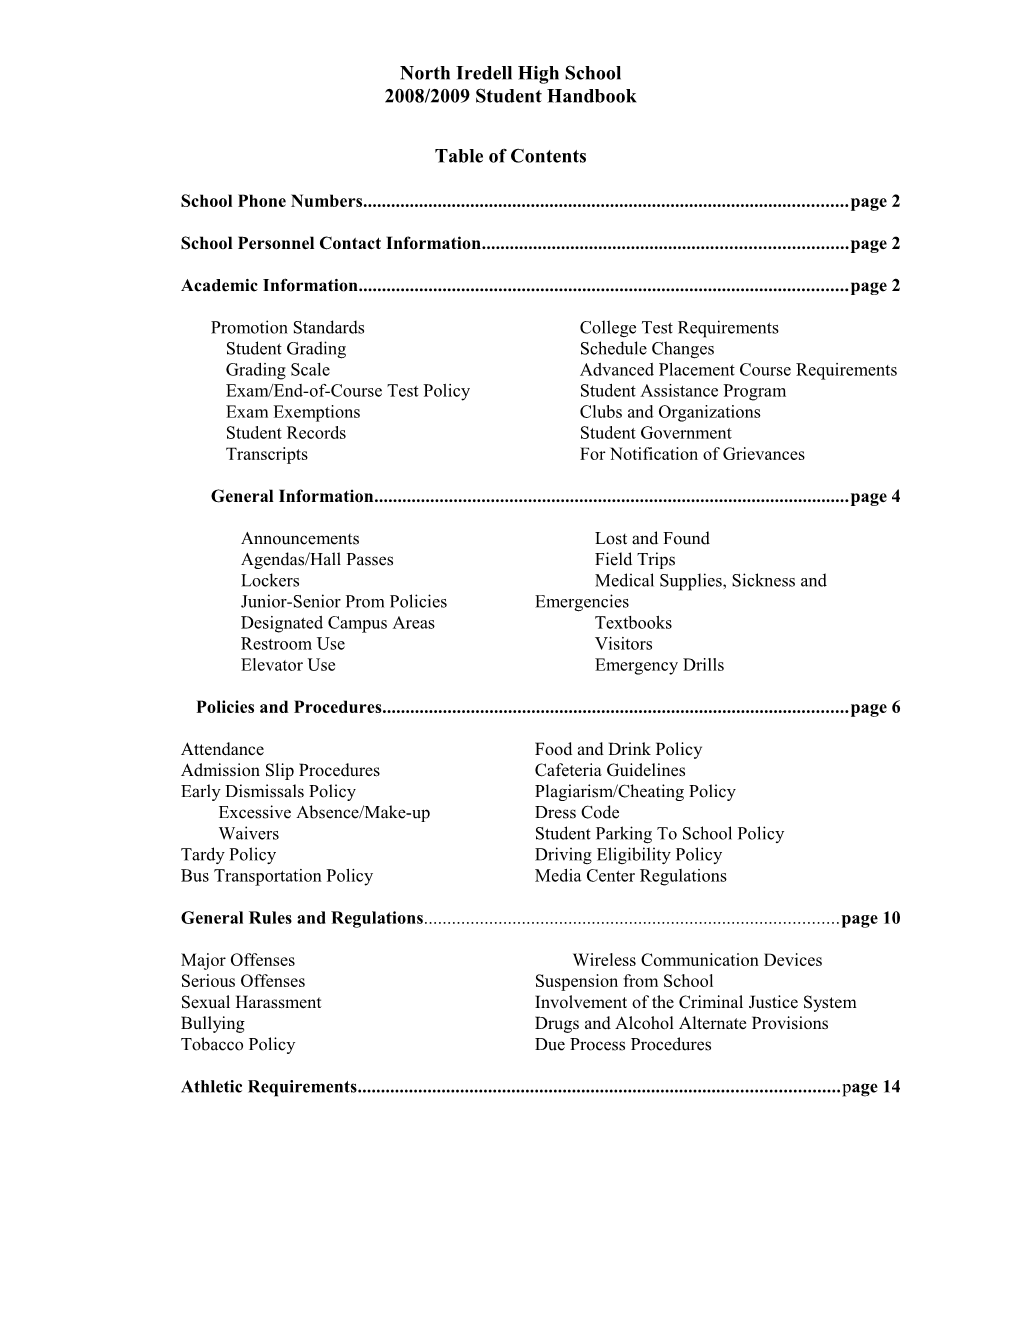 Table of Contents s437